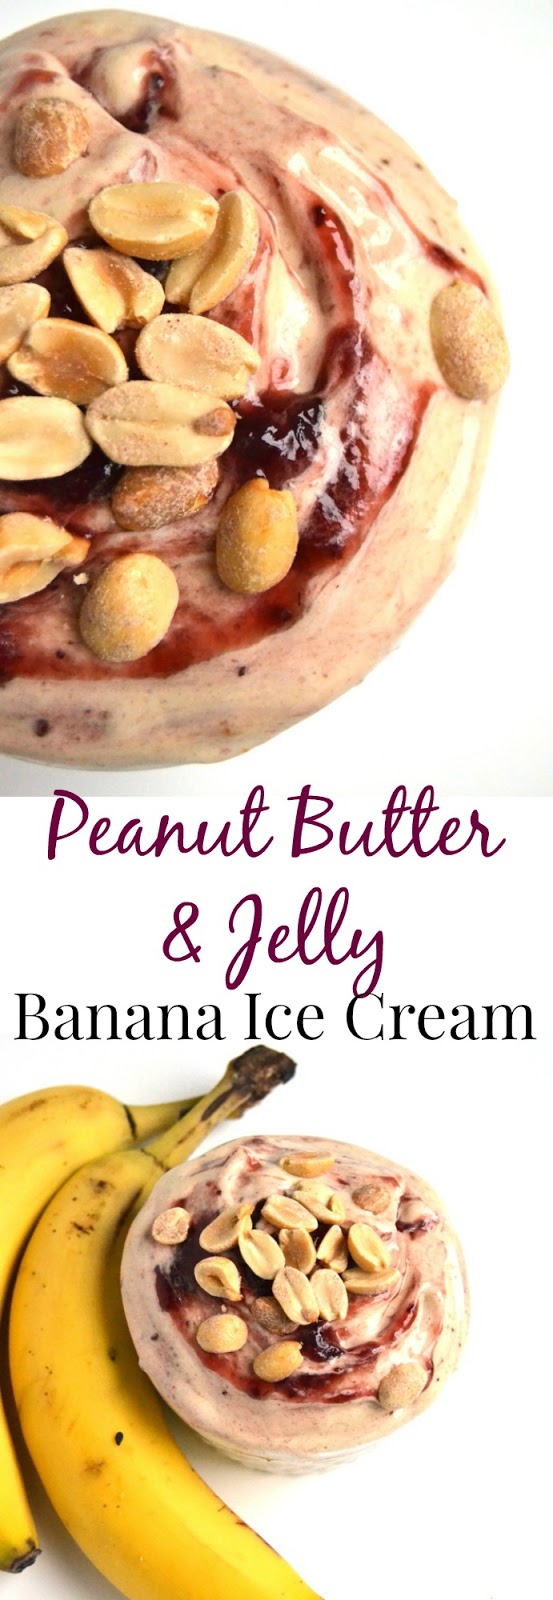 Peanut Butter and Jelly Banana Ice Cream is rich and creamy tasting with only 4 healthy ingredients and only takes 5 minutes to make! www.nutritionistreviews.com